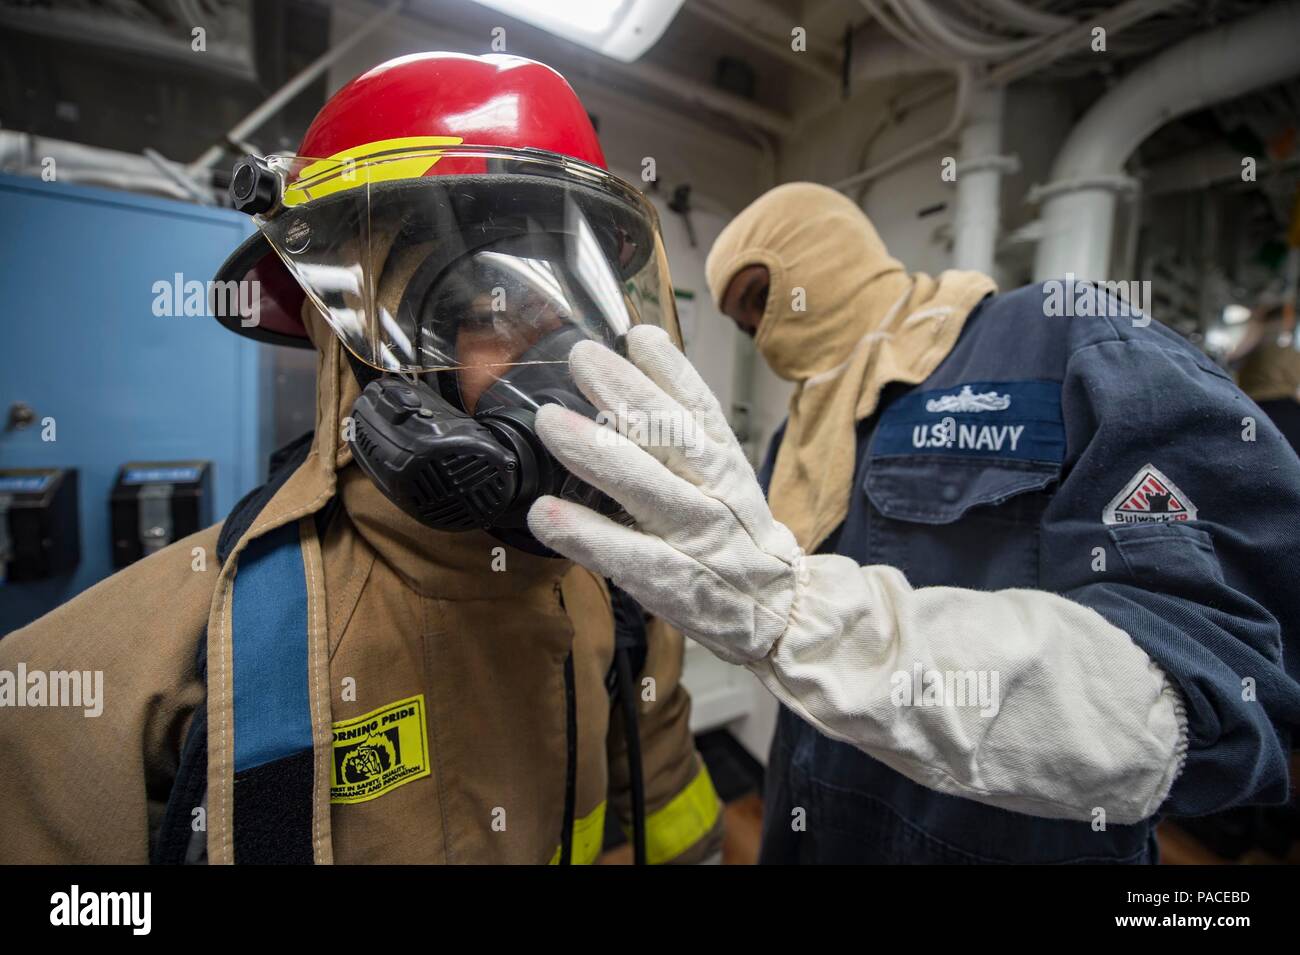 160311-N-MD297-110 PACIFIC OCEAN (March 11, 2016) - Machinist's Mate 2nd Class Daurone Willis inspects Gas Turbine Systems Technician (Mechanical) Fireman John Turner for the proper wear of a firefighting ensemble during a main space fire drill aboard Arleigh Burke-class guided-missile destroyer USS Lassen (DDG 82). Lassen is deployed to the U.S. 4th Fleet area of responsibility supporting law enforcement operations as part of Operation Martillo. (U.S. Navy photo by Mass Communication Specialist 2nd Class Huey D. Younger Jr./Released) Stock Photo